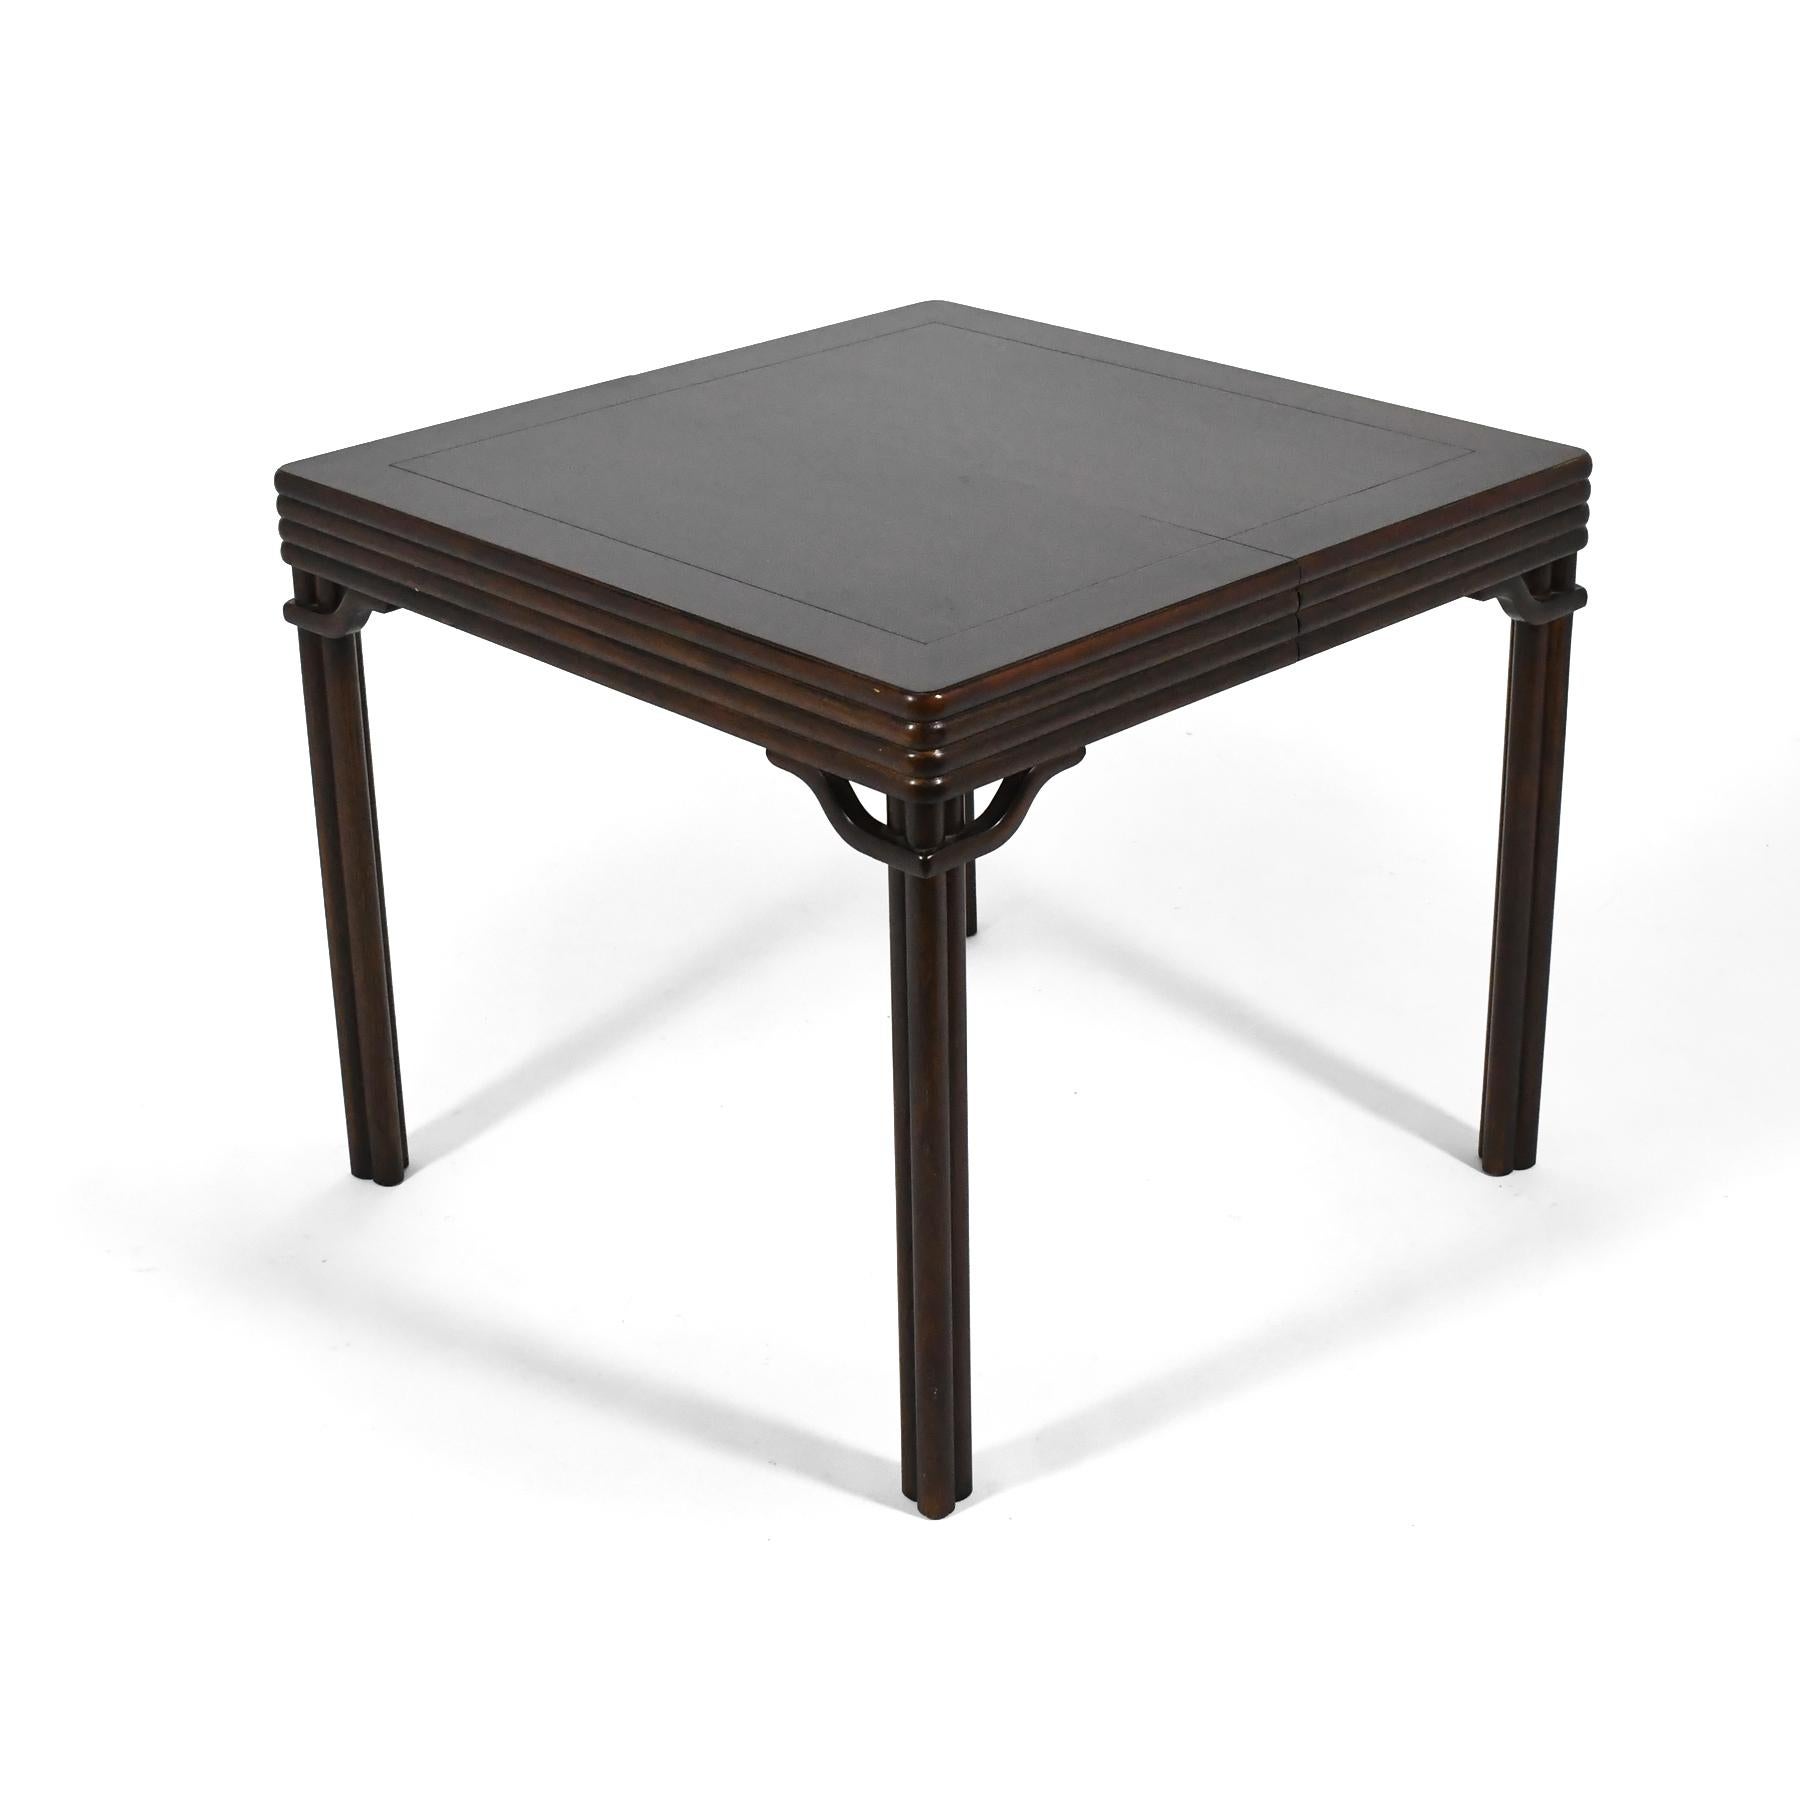 This beautiful mahogany game table by Baker has elegant detailing and two folding 13